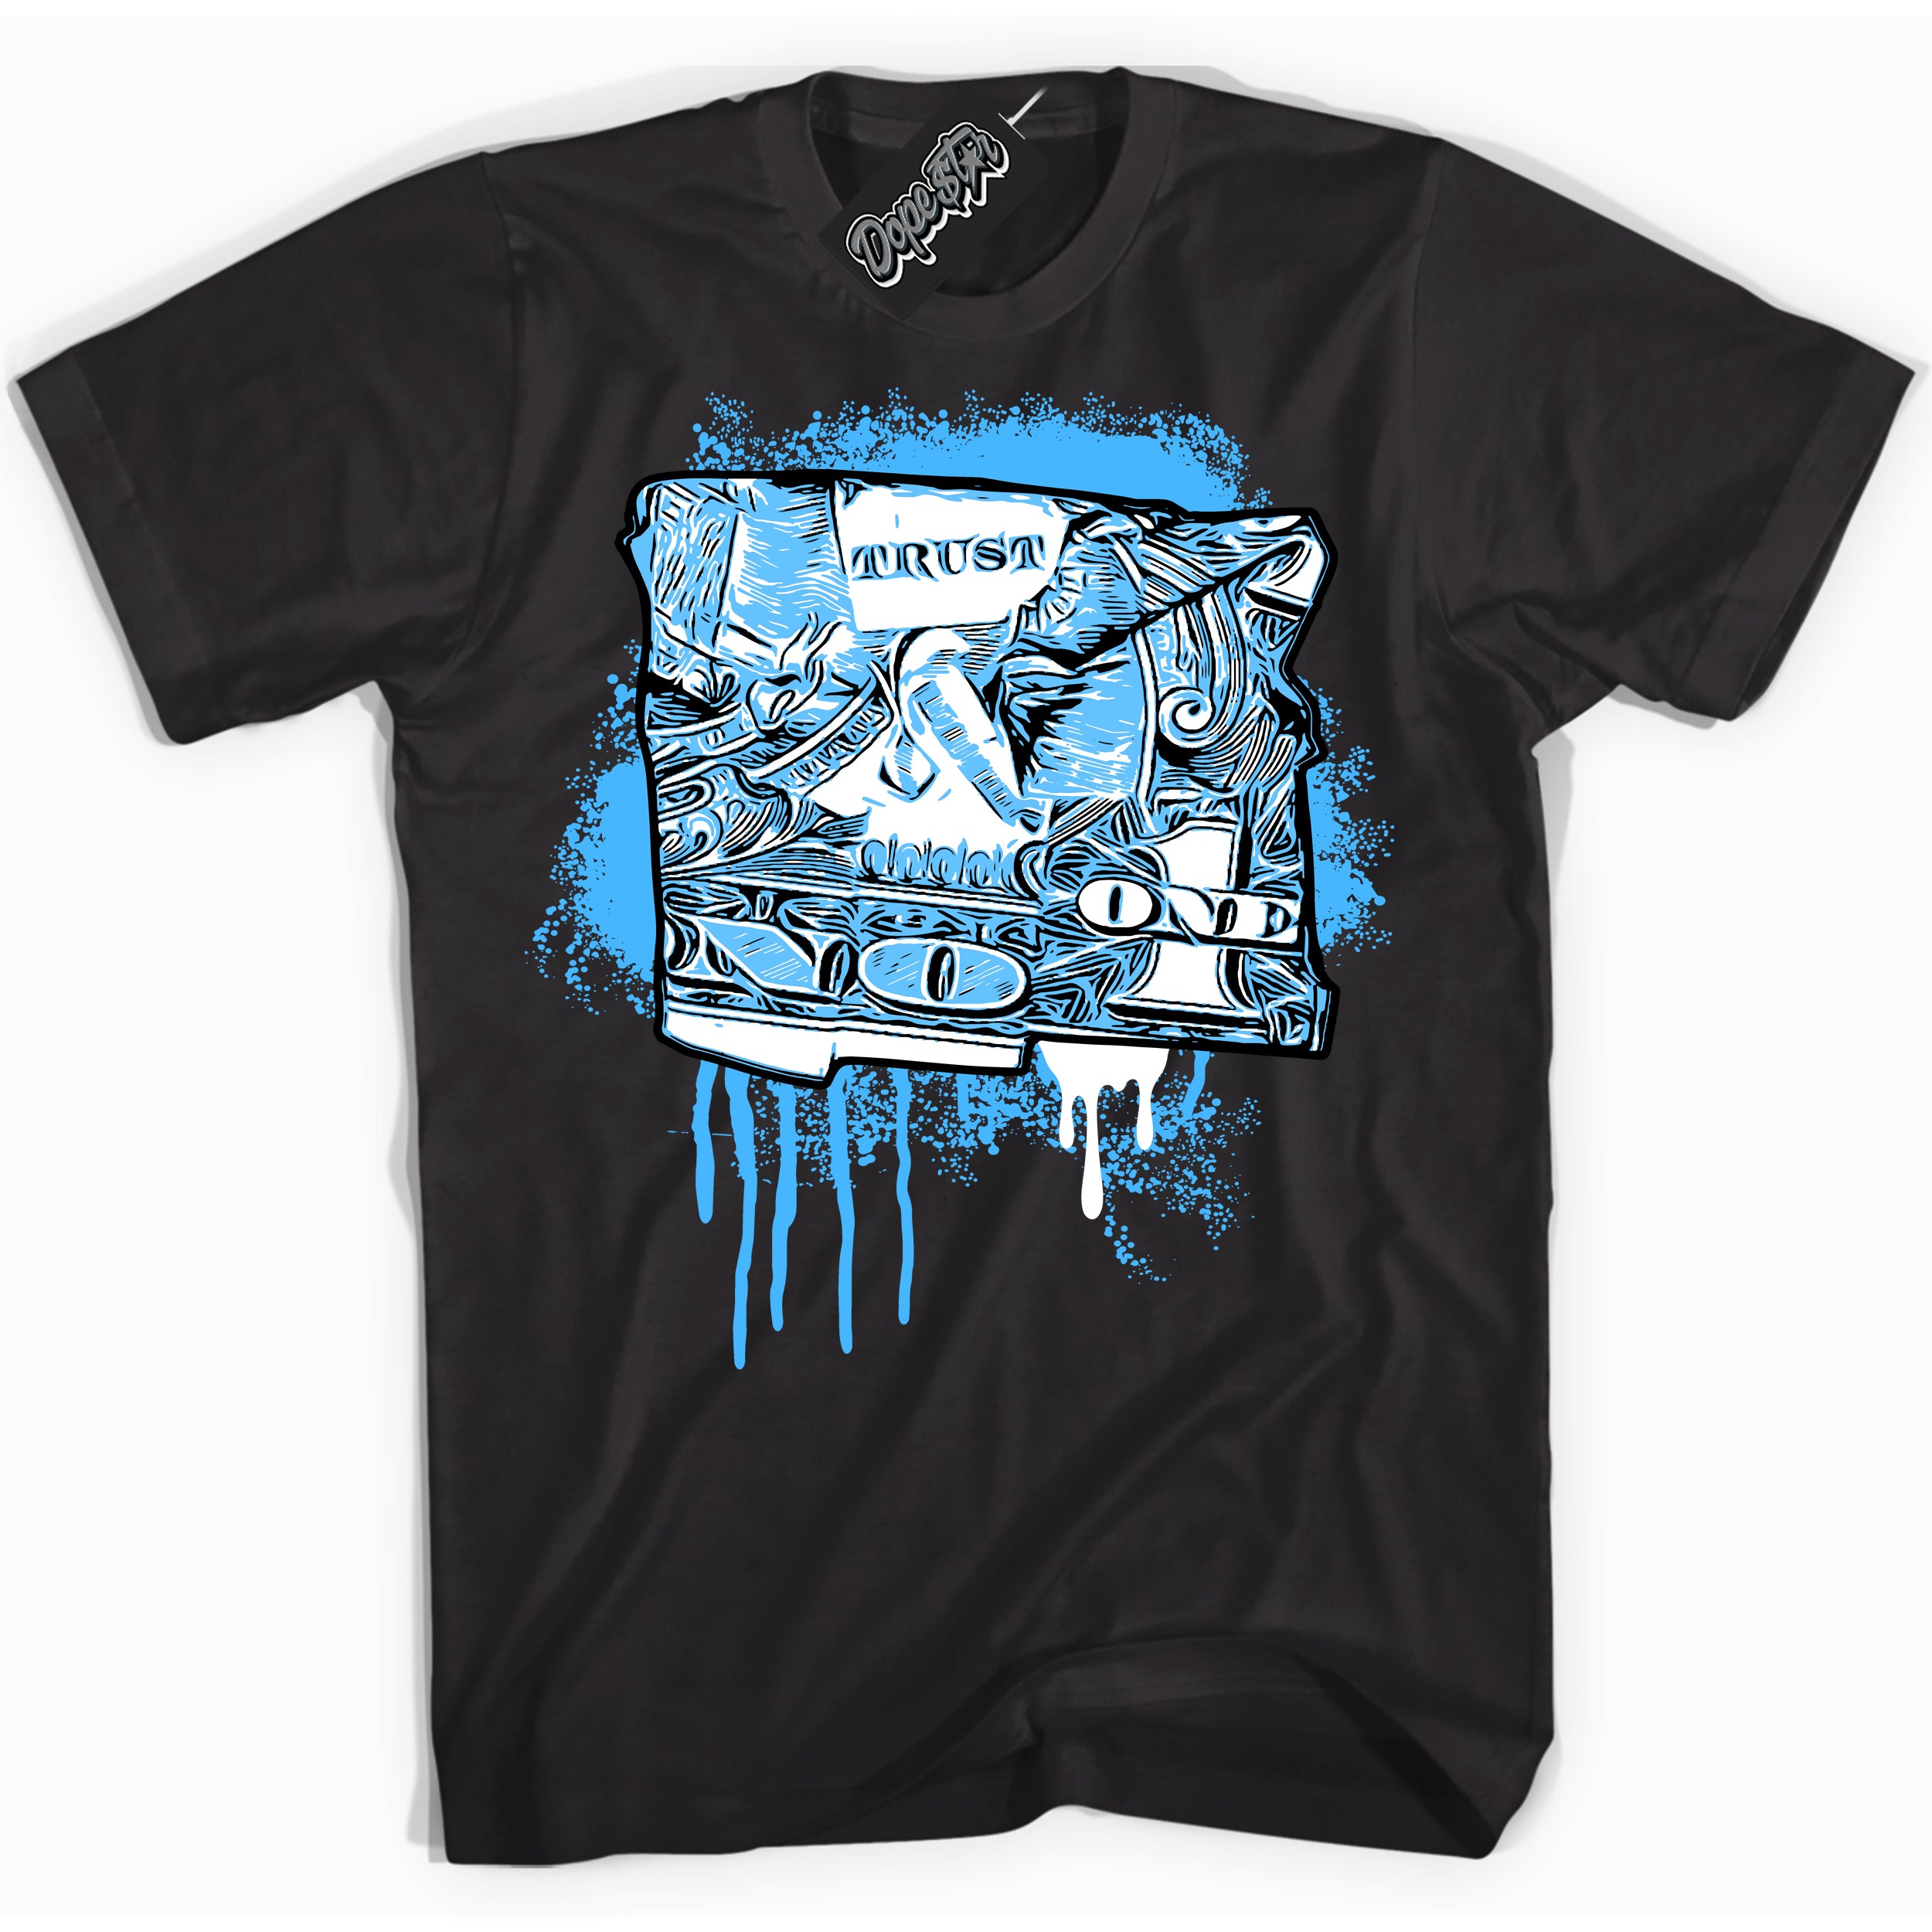 Cool Black graphic tee with “ Trust No One Dollar ” design, that perfectly matches Powder Blue 9s sneakers 